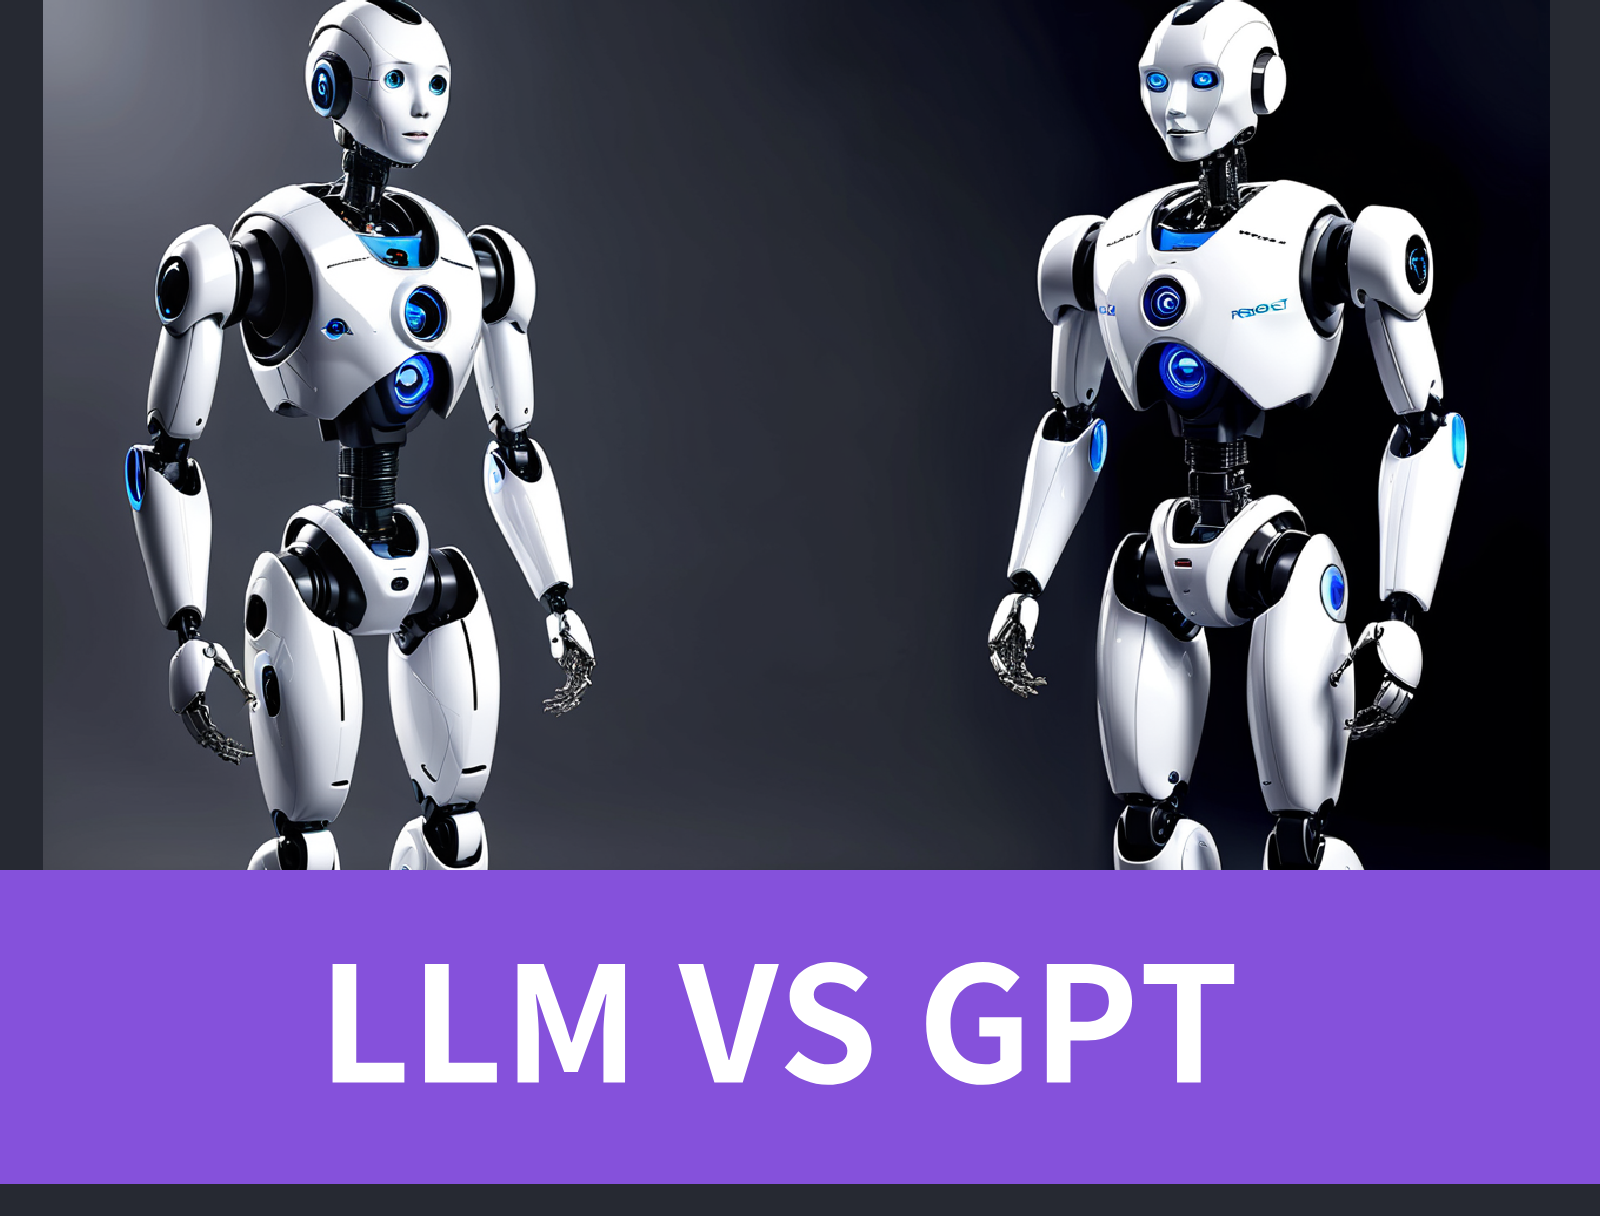 What is the difference between LLM and GPT